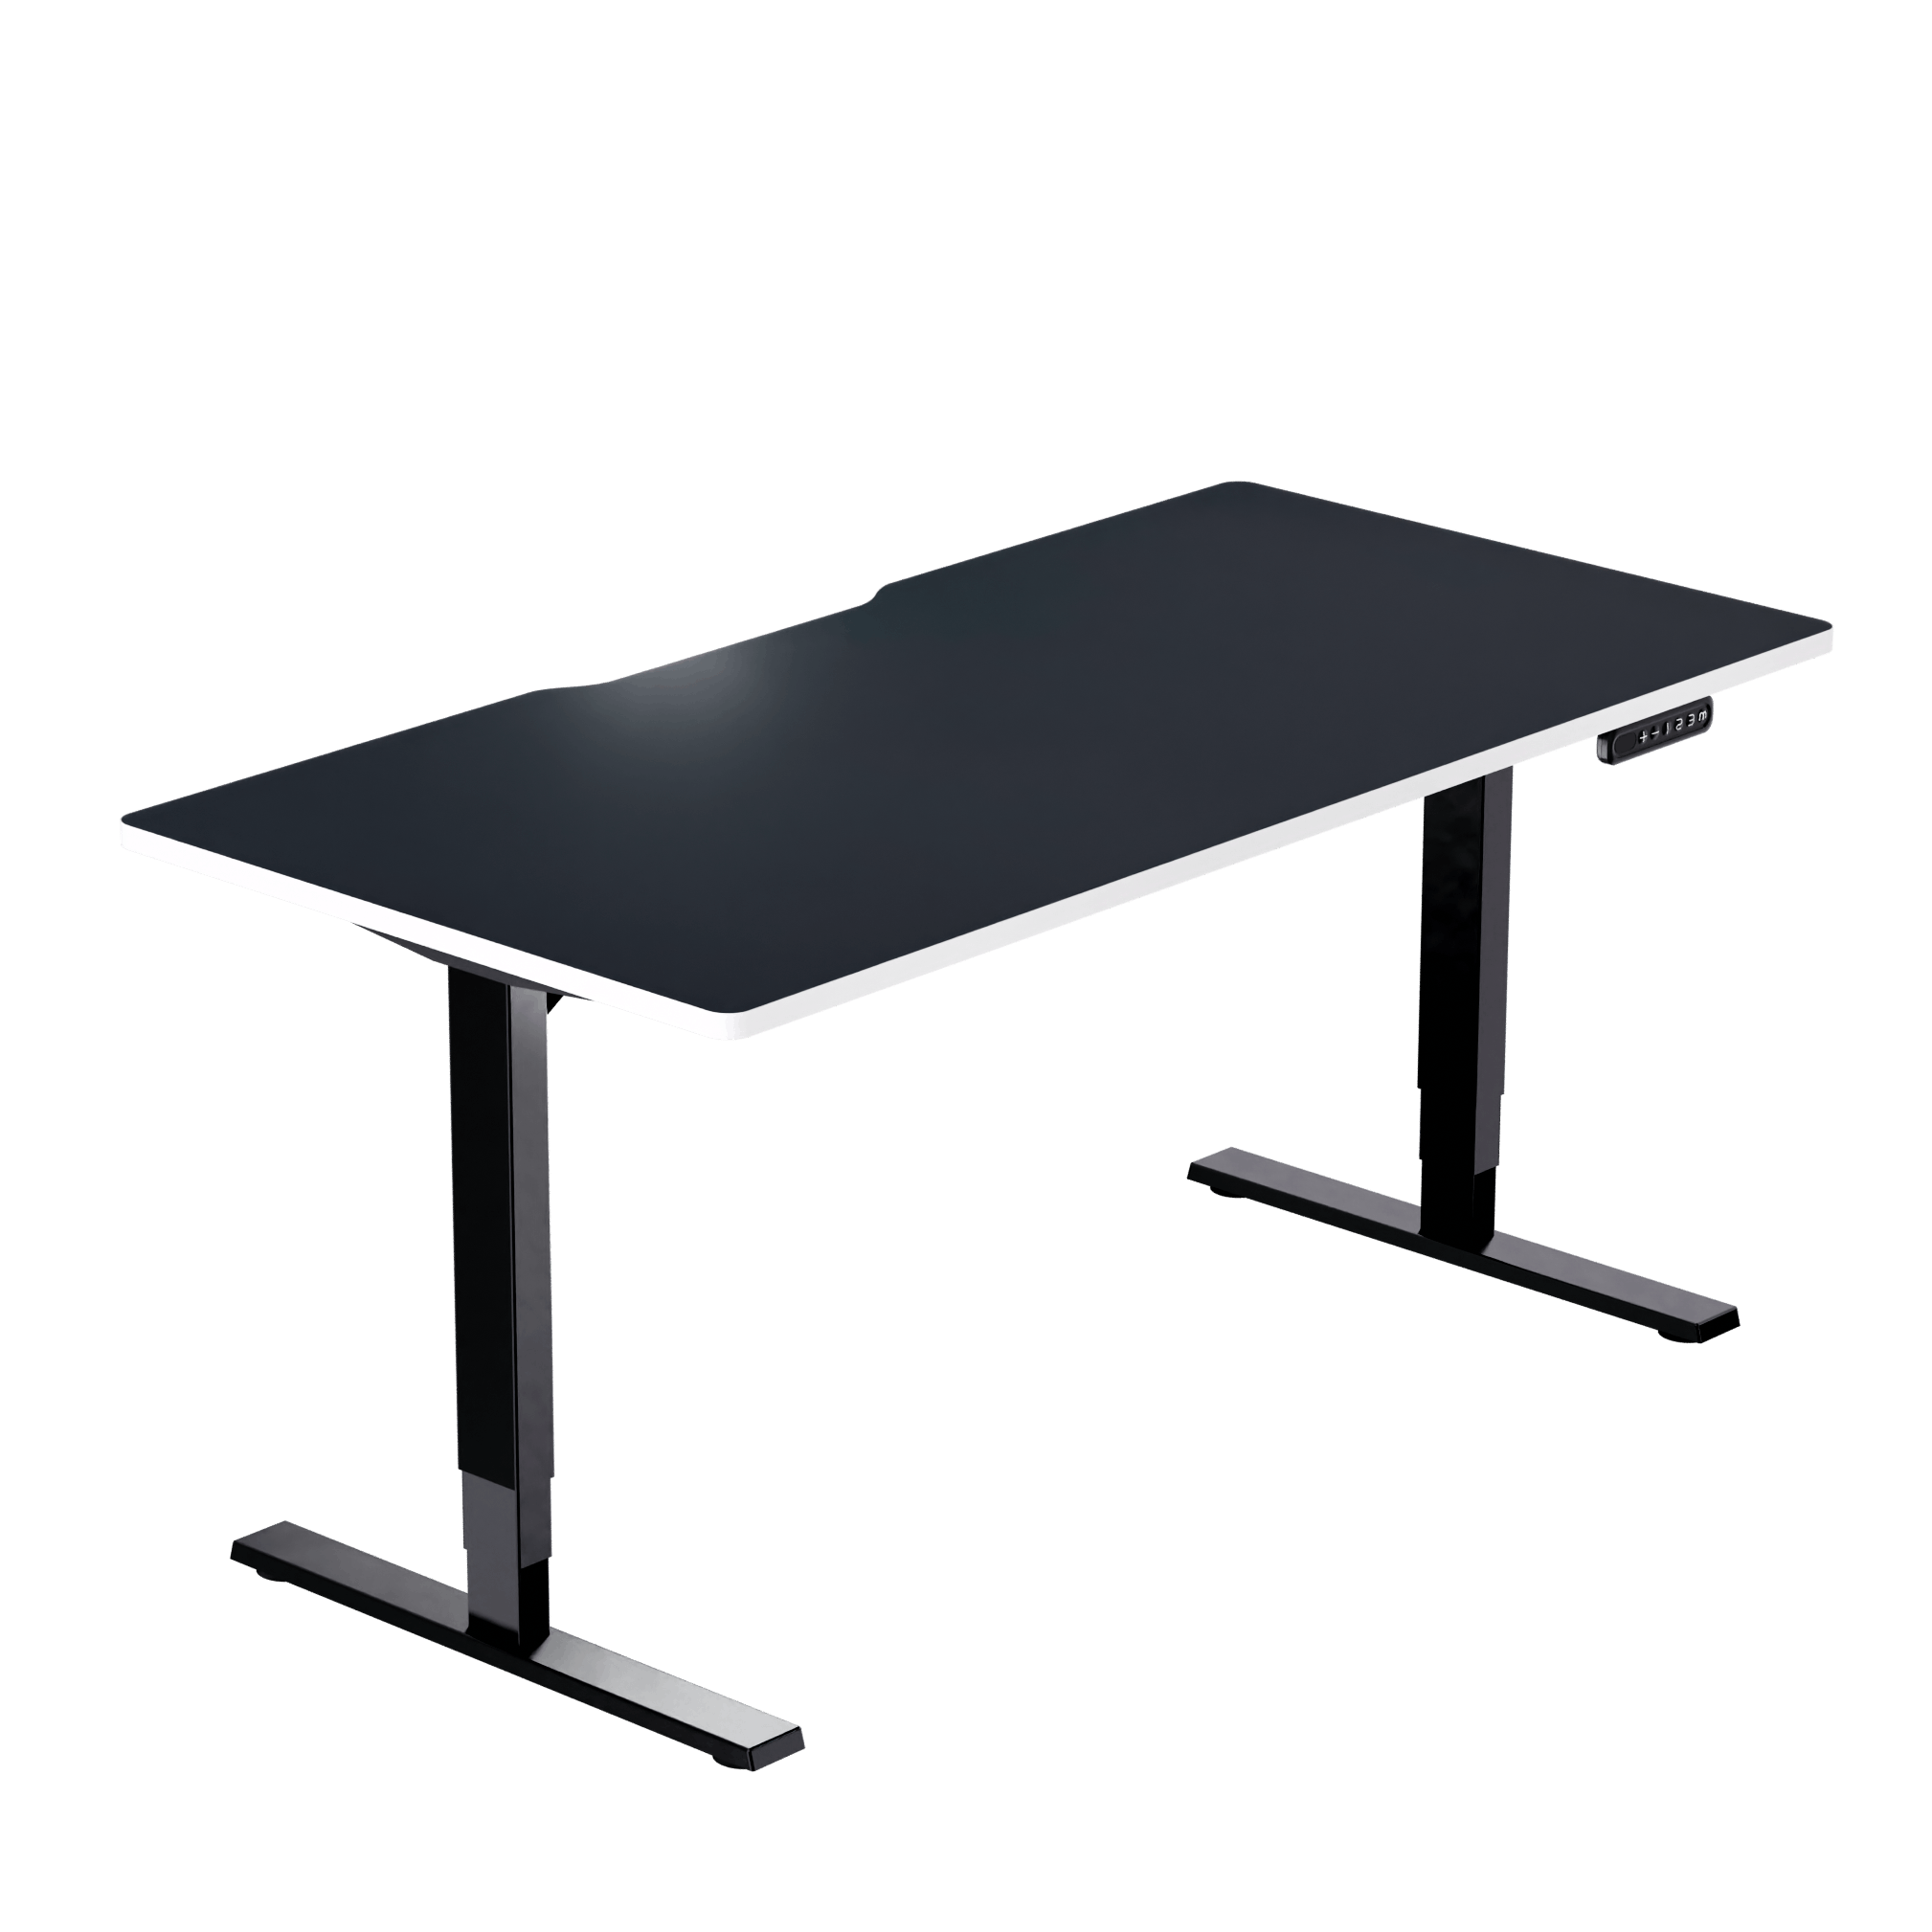 leetdesk pc desks are available in many colors, sizes, shapes, and come with a variety of accessories